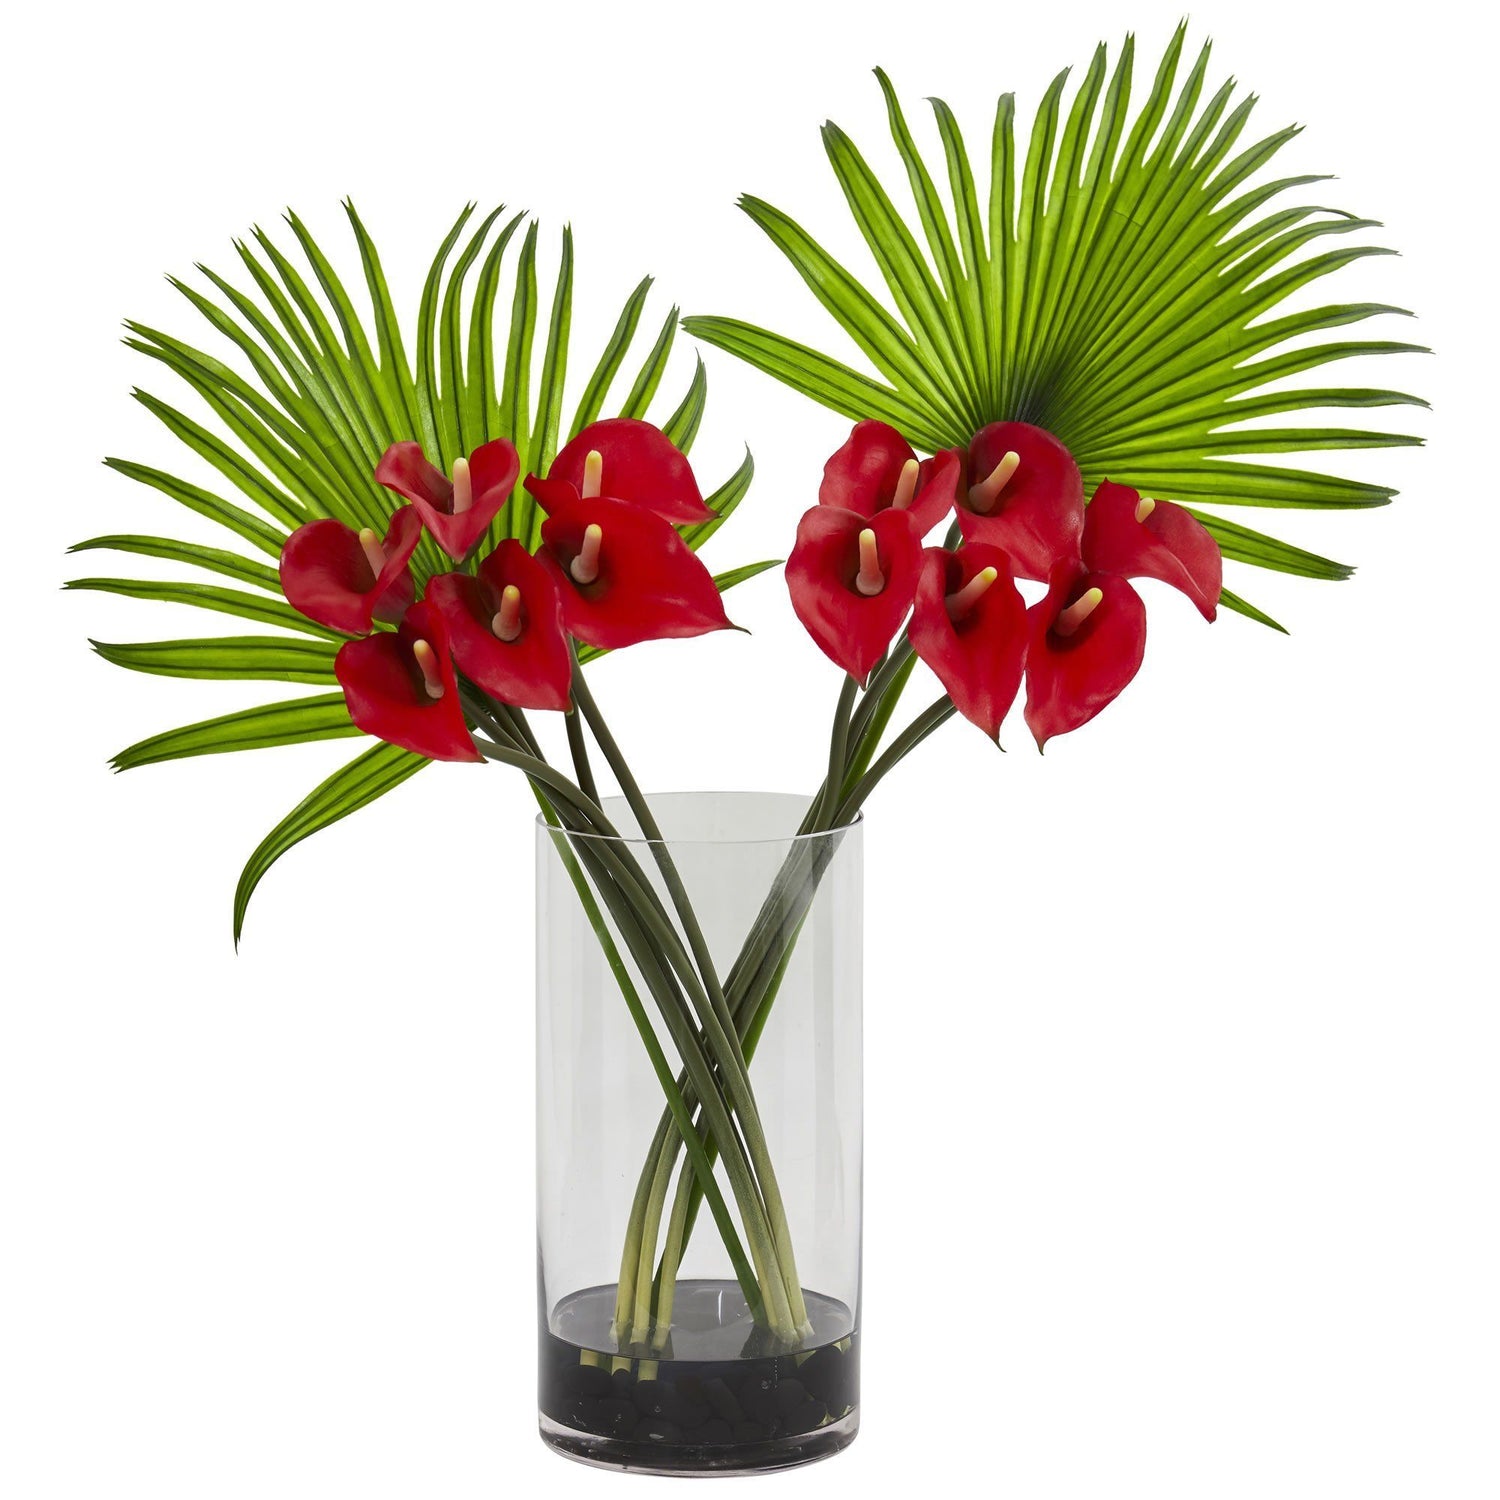 Calla Lily and Fan Palm Artificial Arrangement in Cylinder Glass